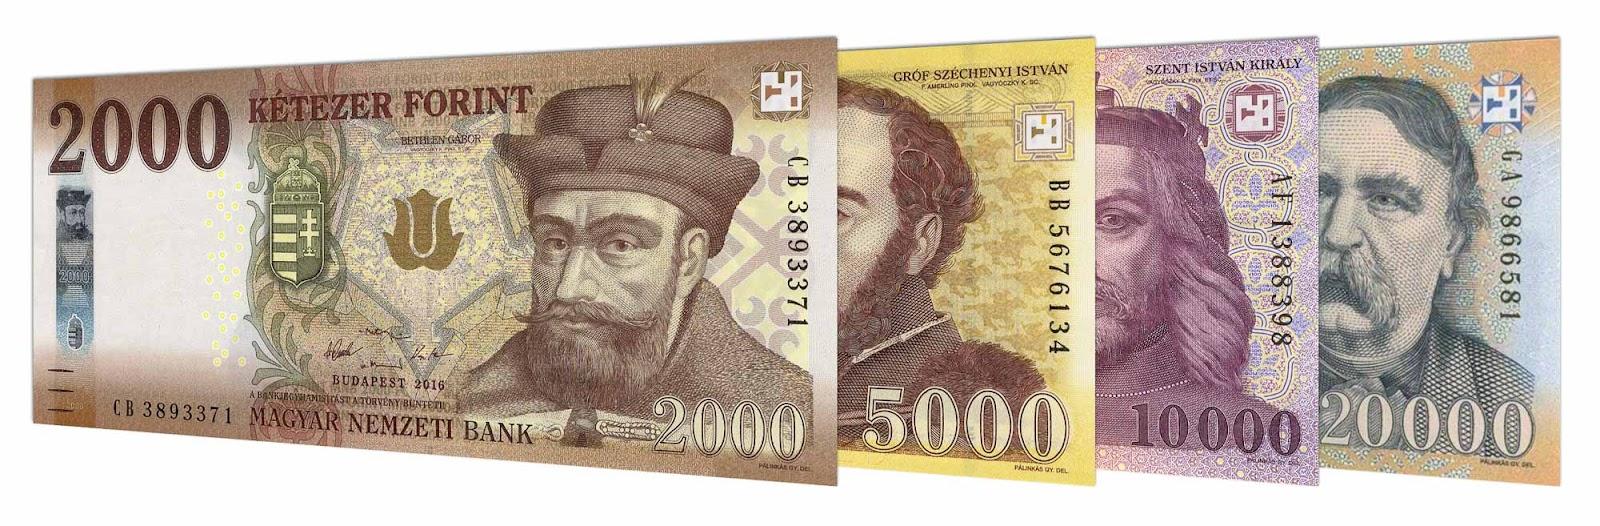 Buy Hungarian Forints online - HUF home delivery